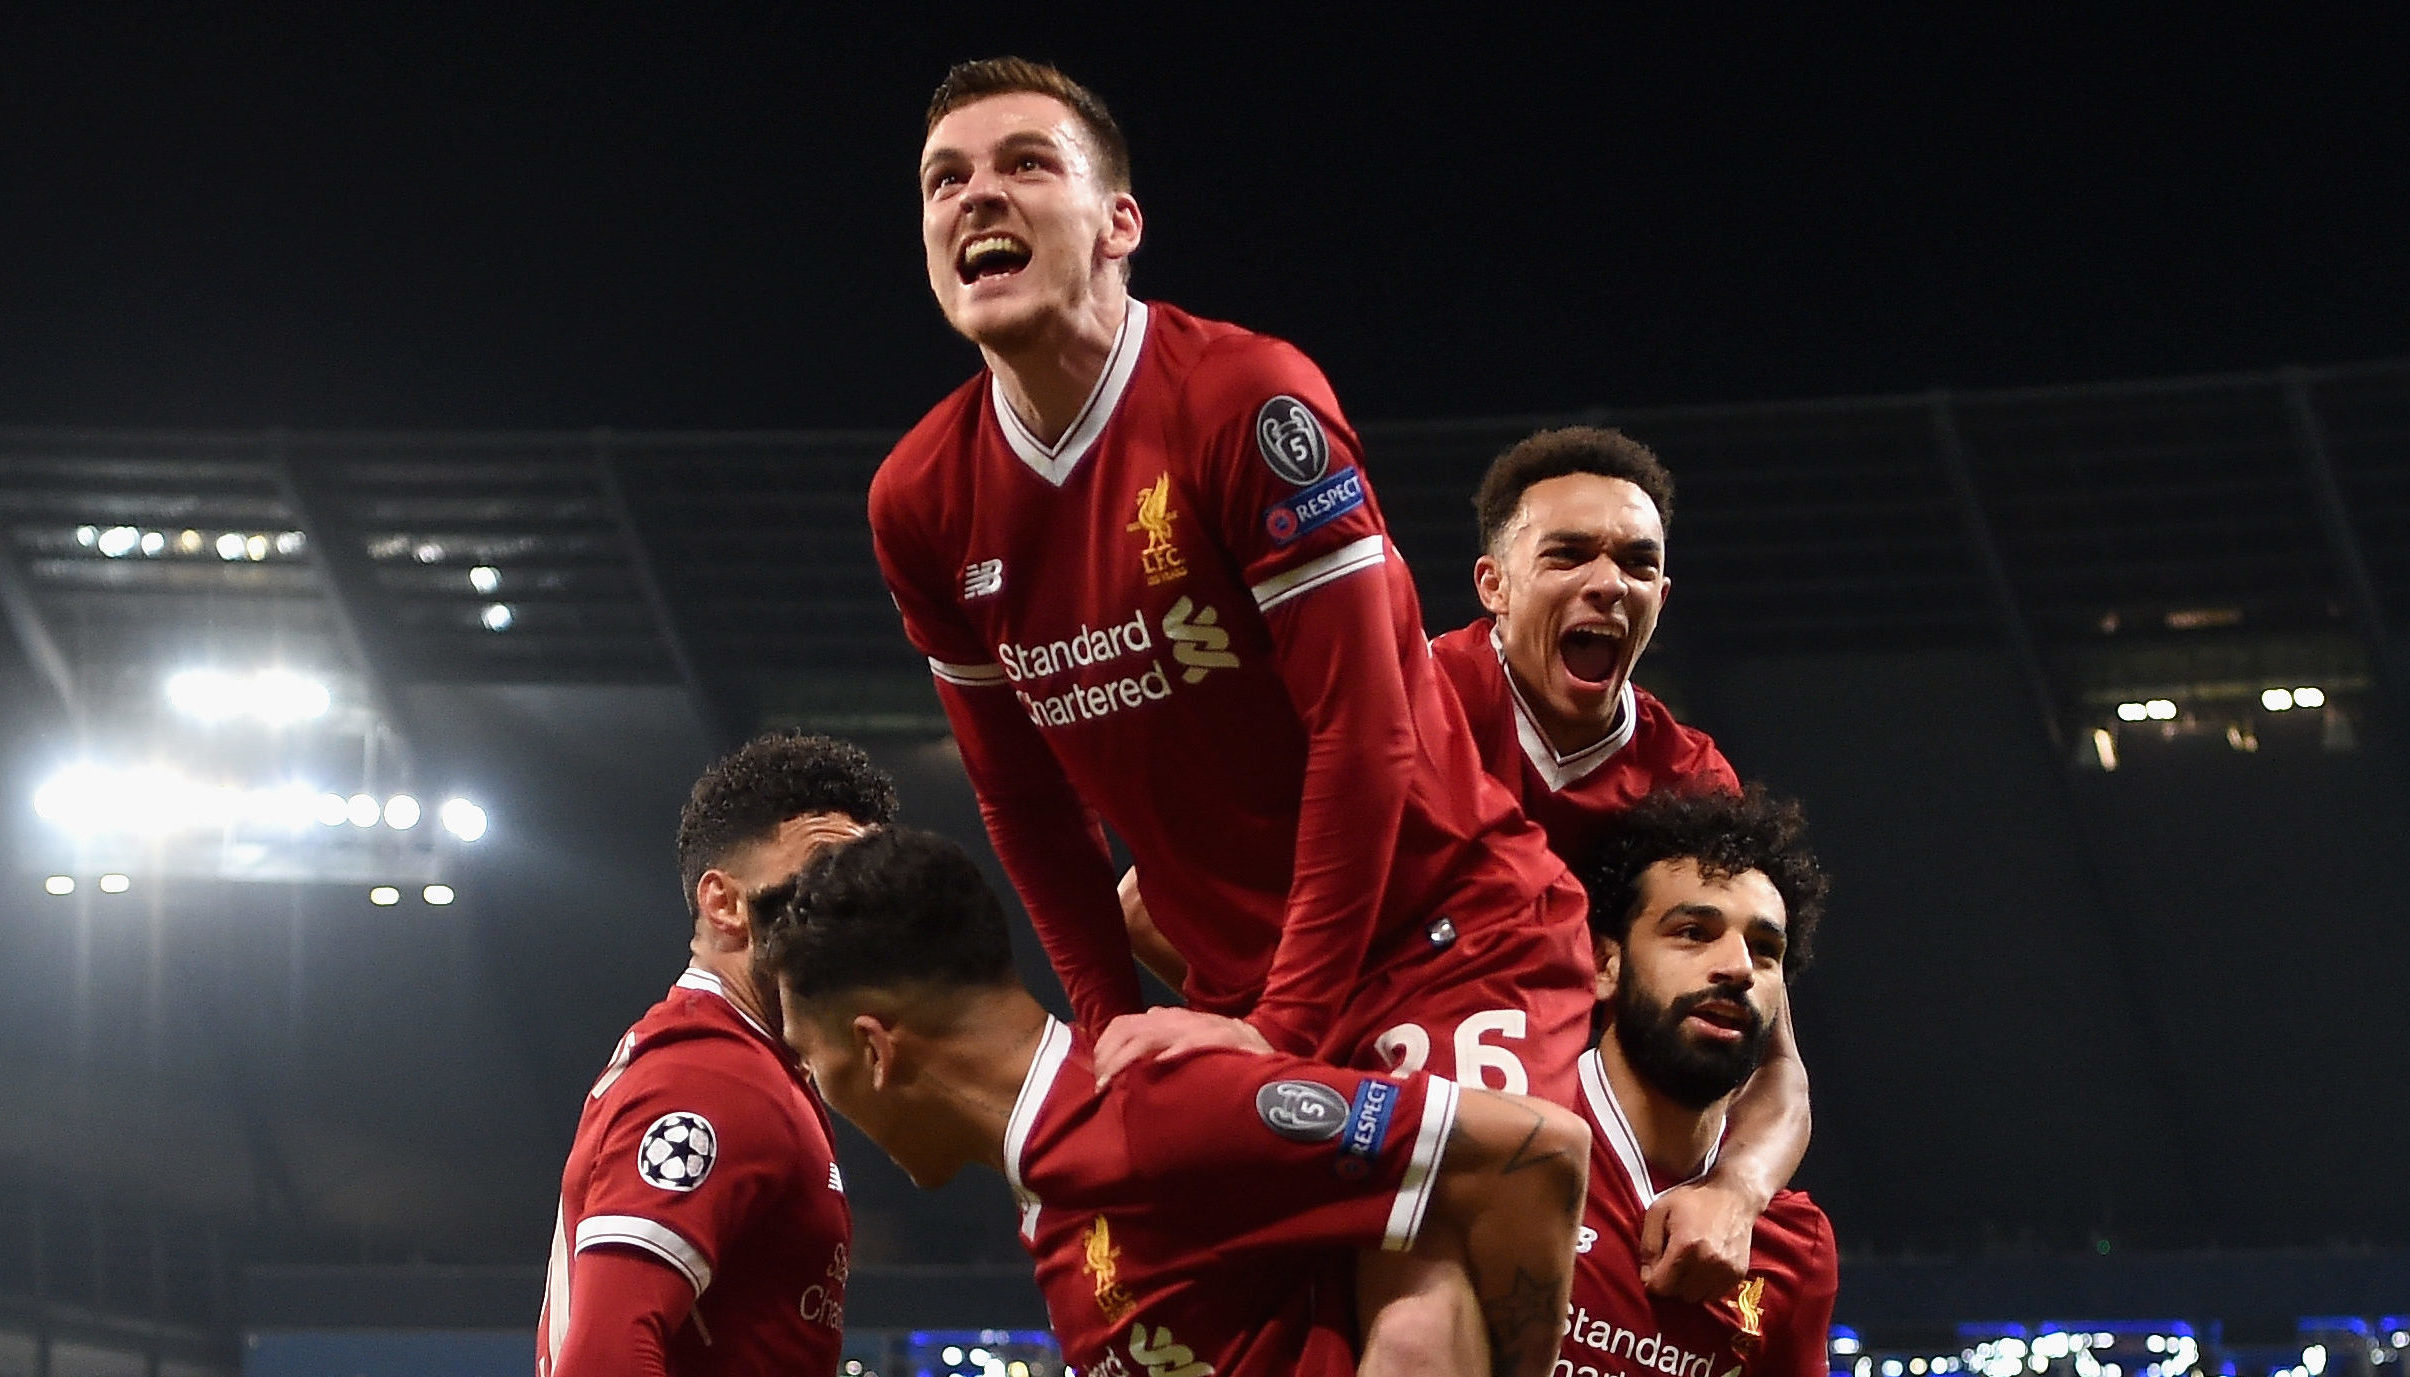 Andy Robertson of Liverpool joins in as the team celebrate their first goal during the UEFA Champions League Quarter Final Second Leg match between Manchester City and Liverpool.